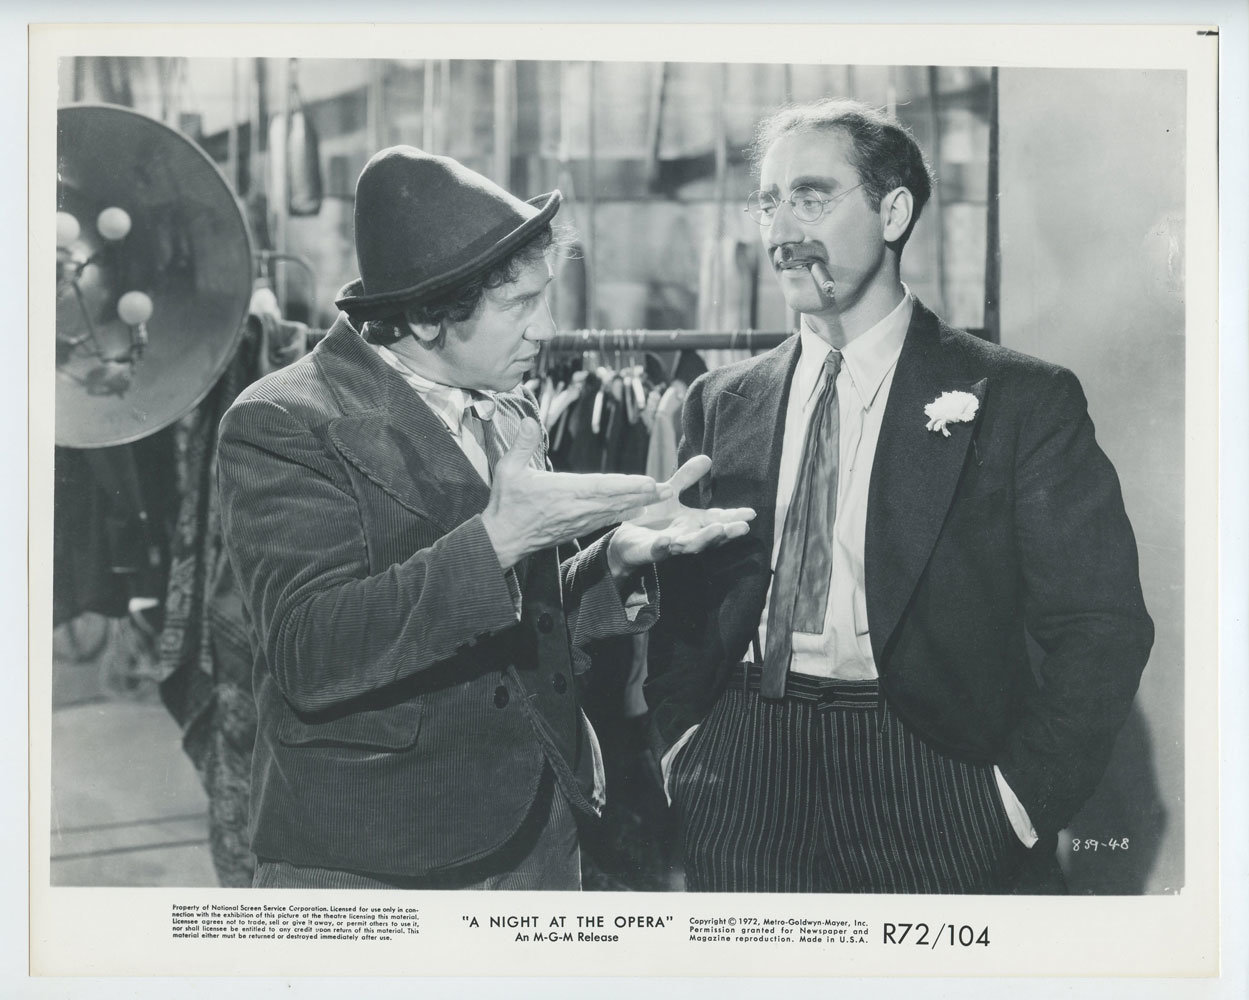 Groucho Marx Chico Marx Photo 1935 A Night at the Opera Vintage R72